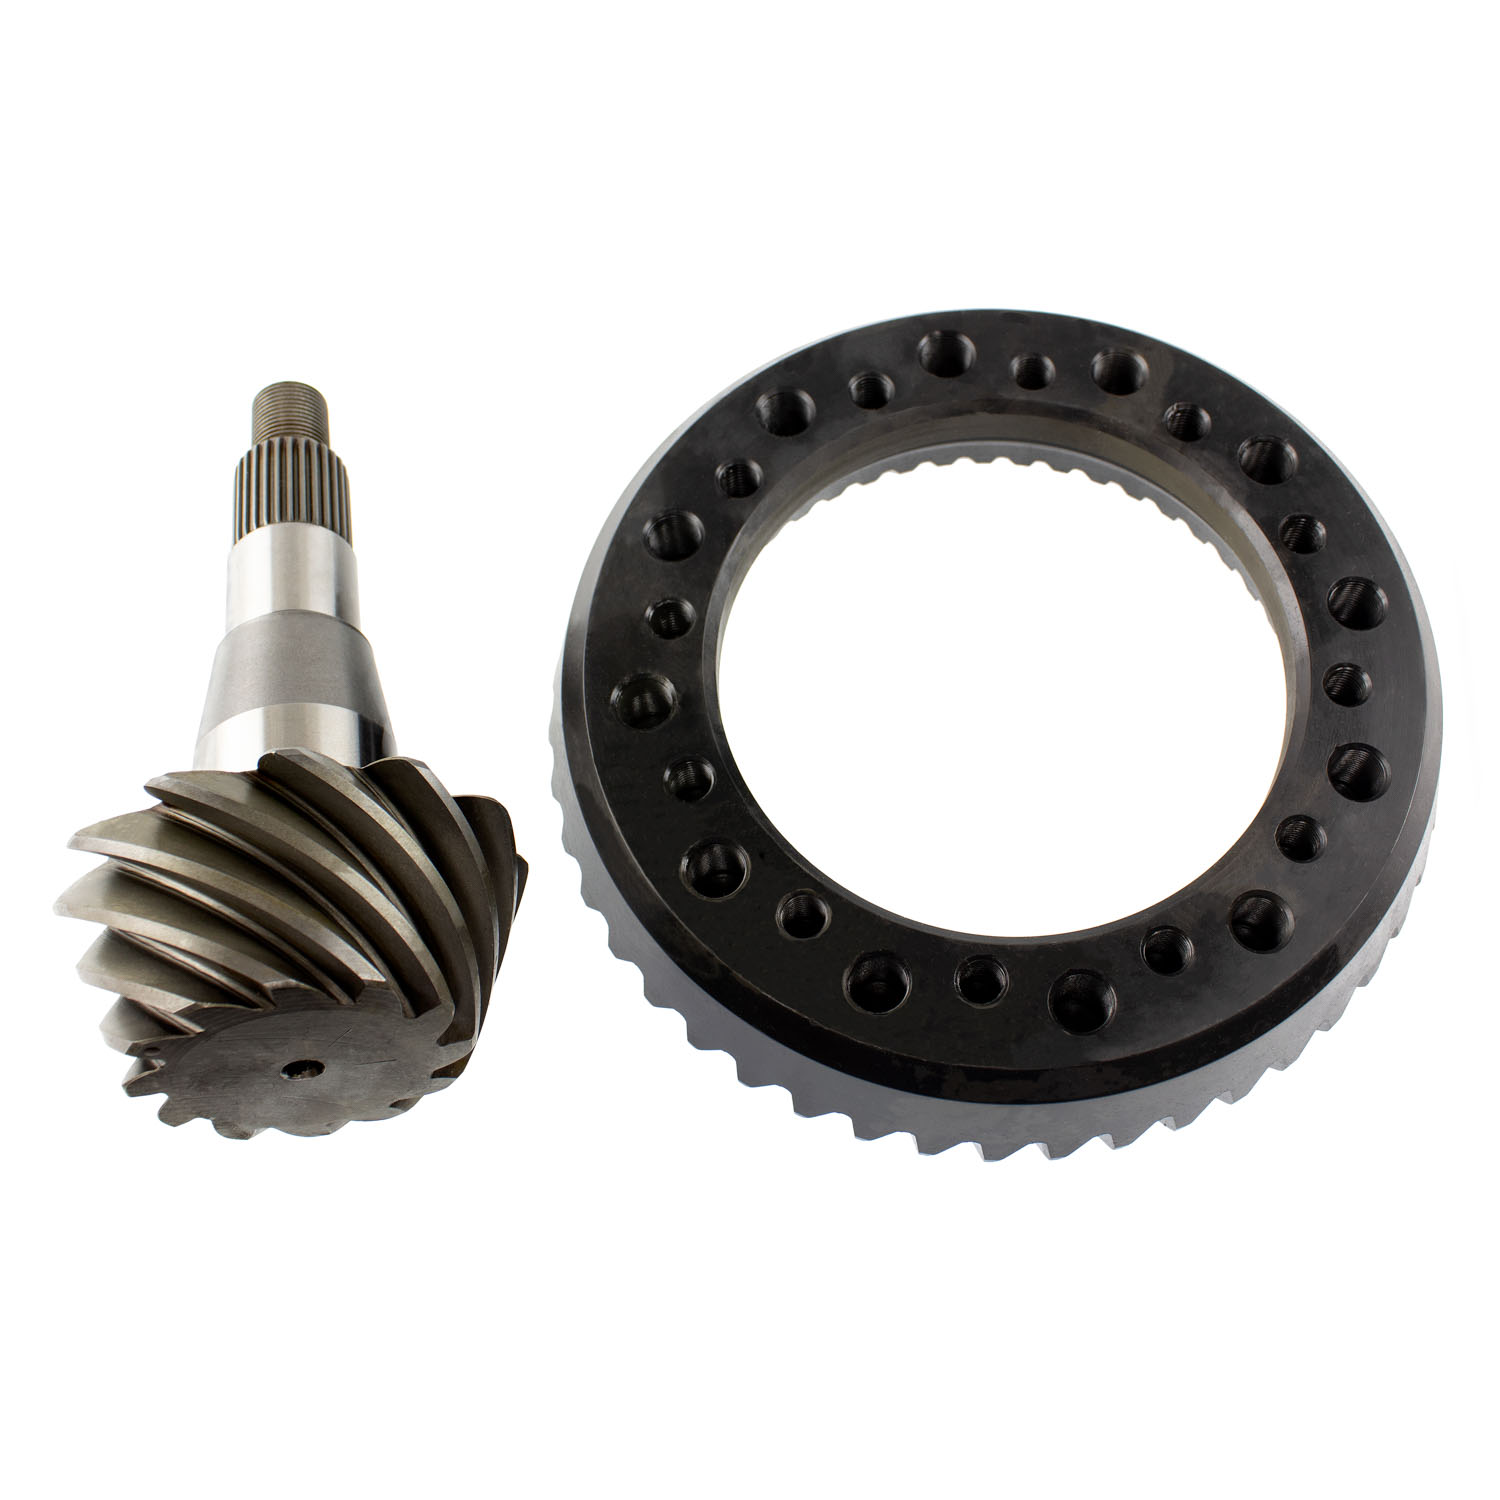 3.90 PLATINUM TORQUE 3.92 RING AND PINION GEARSET COMPATIBLE WITH DODGE/CHRYSLER 9.25 